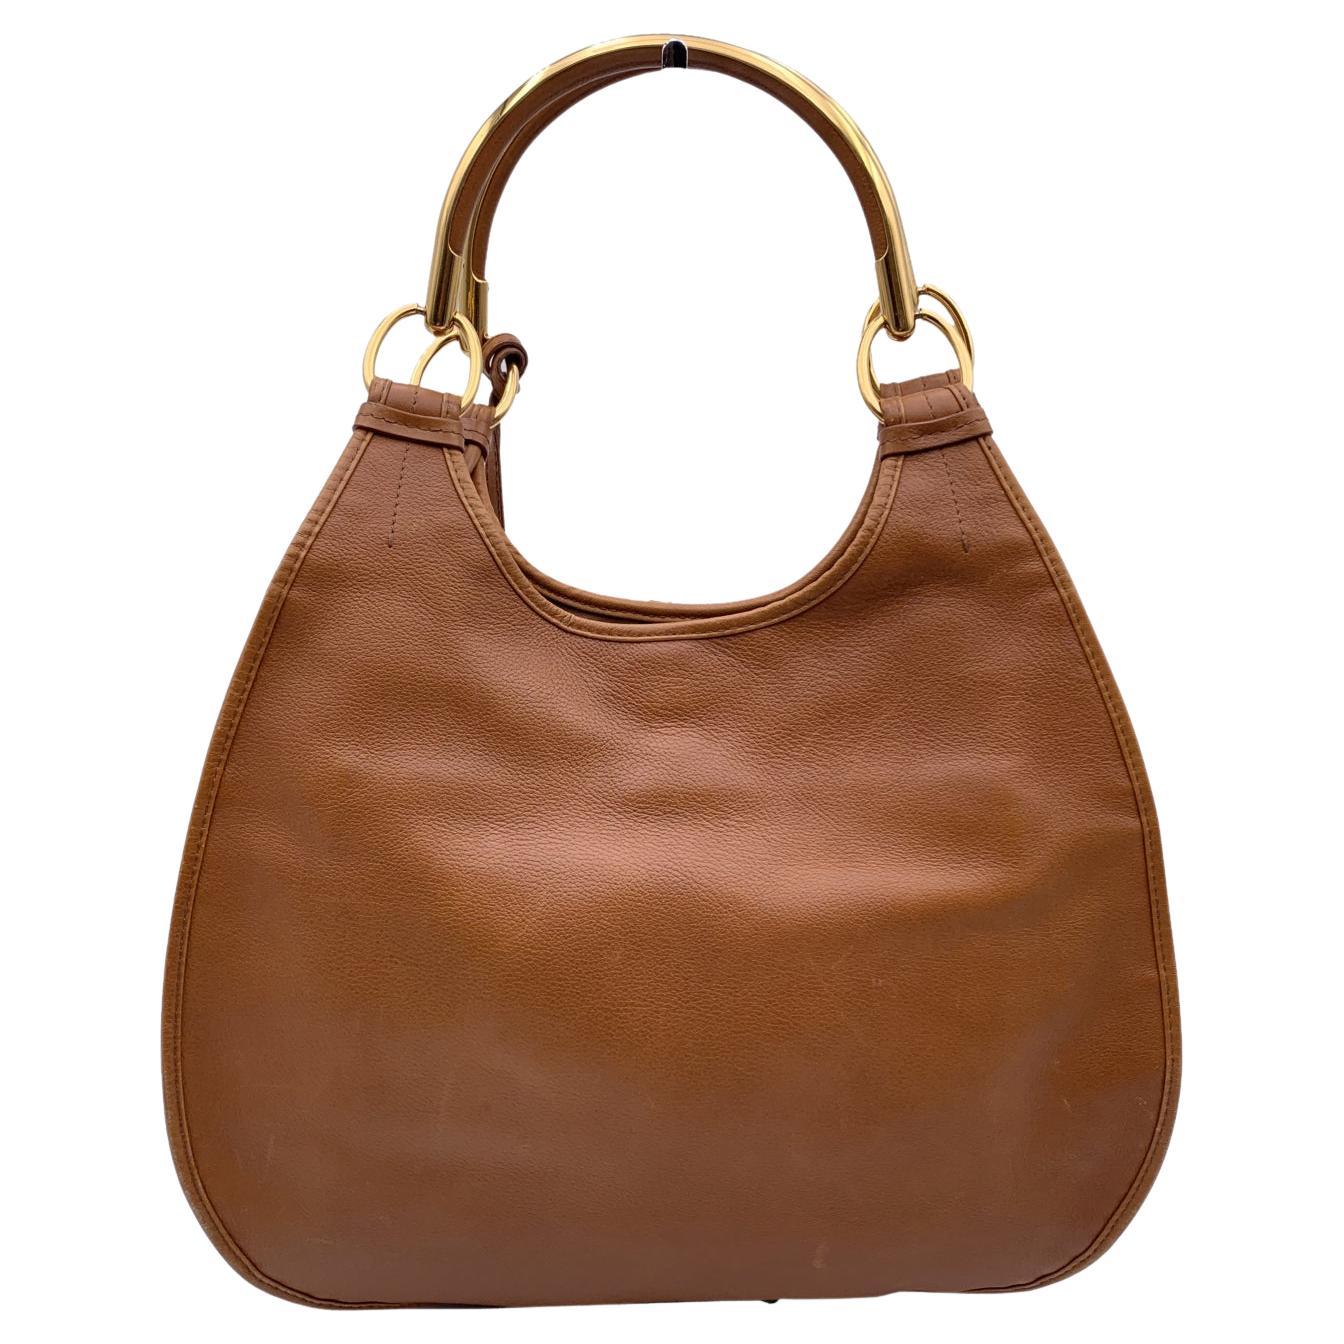 CHRISTIAN DIOR 'Dior 61' hobo bag in leather, designed by John Galliano, from the 2008/2009 collection. The bag is inspired by the design of the 60s. 2 gold metal handles. Gold metal D-shaped letter charm attached on the handle. Tan leather. 2 front